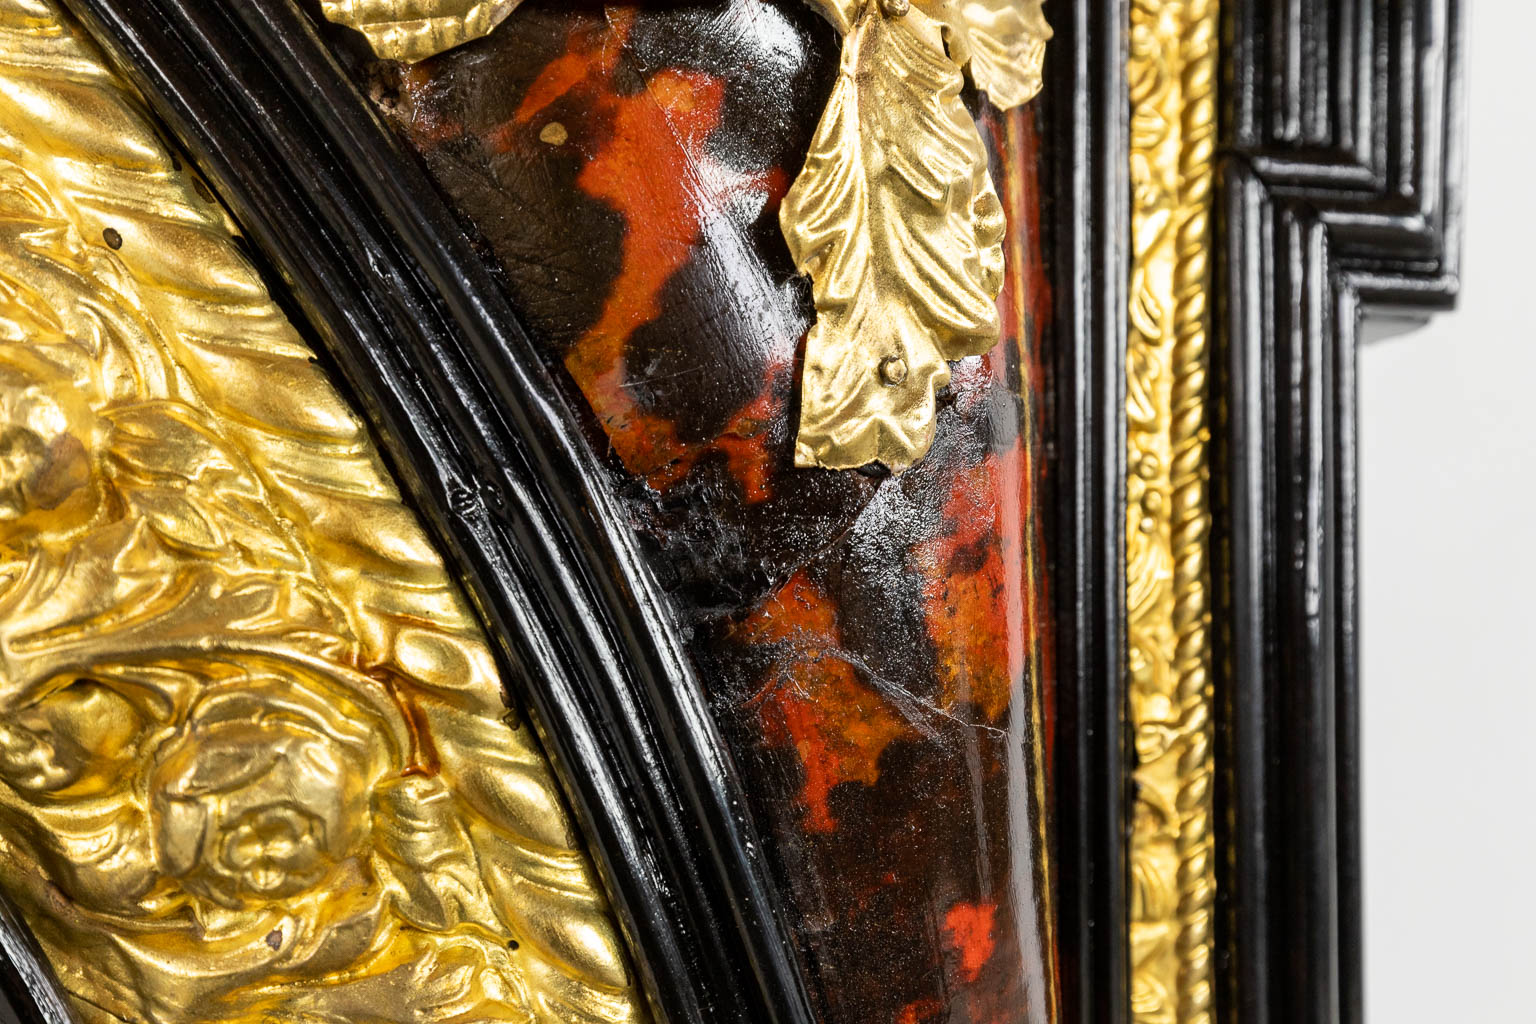 A mirror, tortoise shell and repousse copper, Napoleon 3, 19th C. (W:74 x H:112 cm)